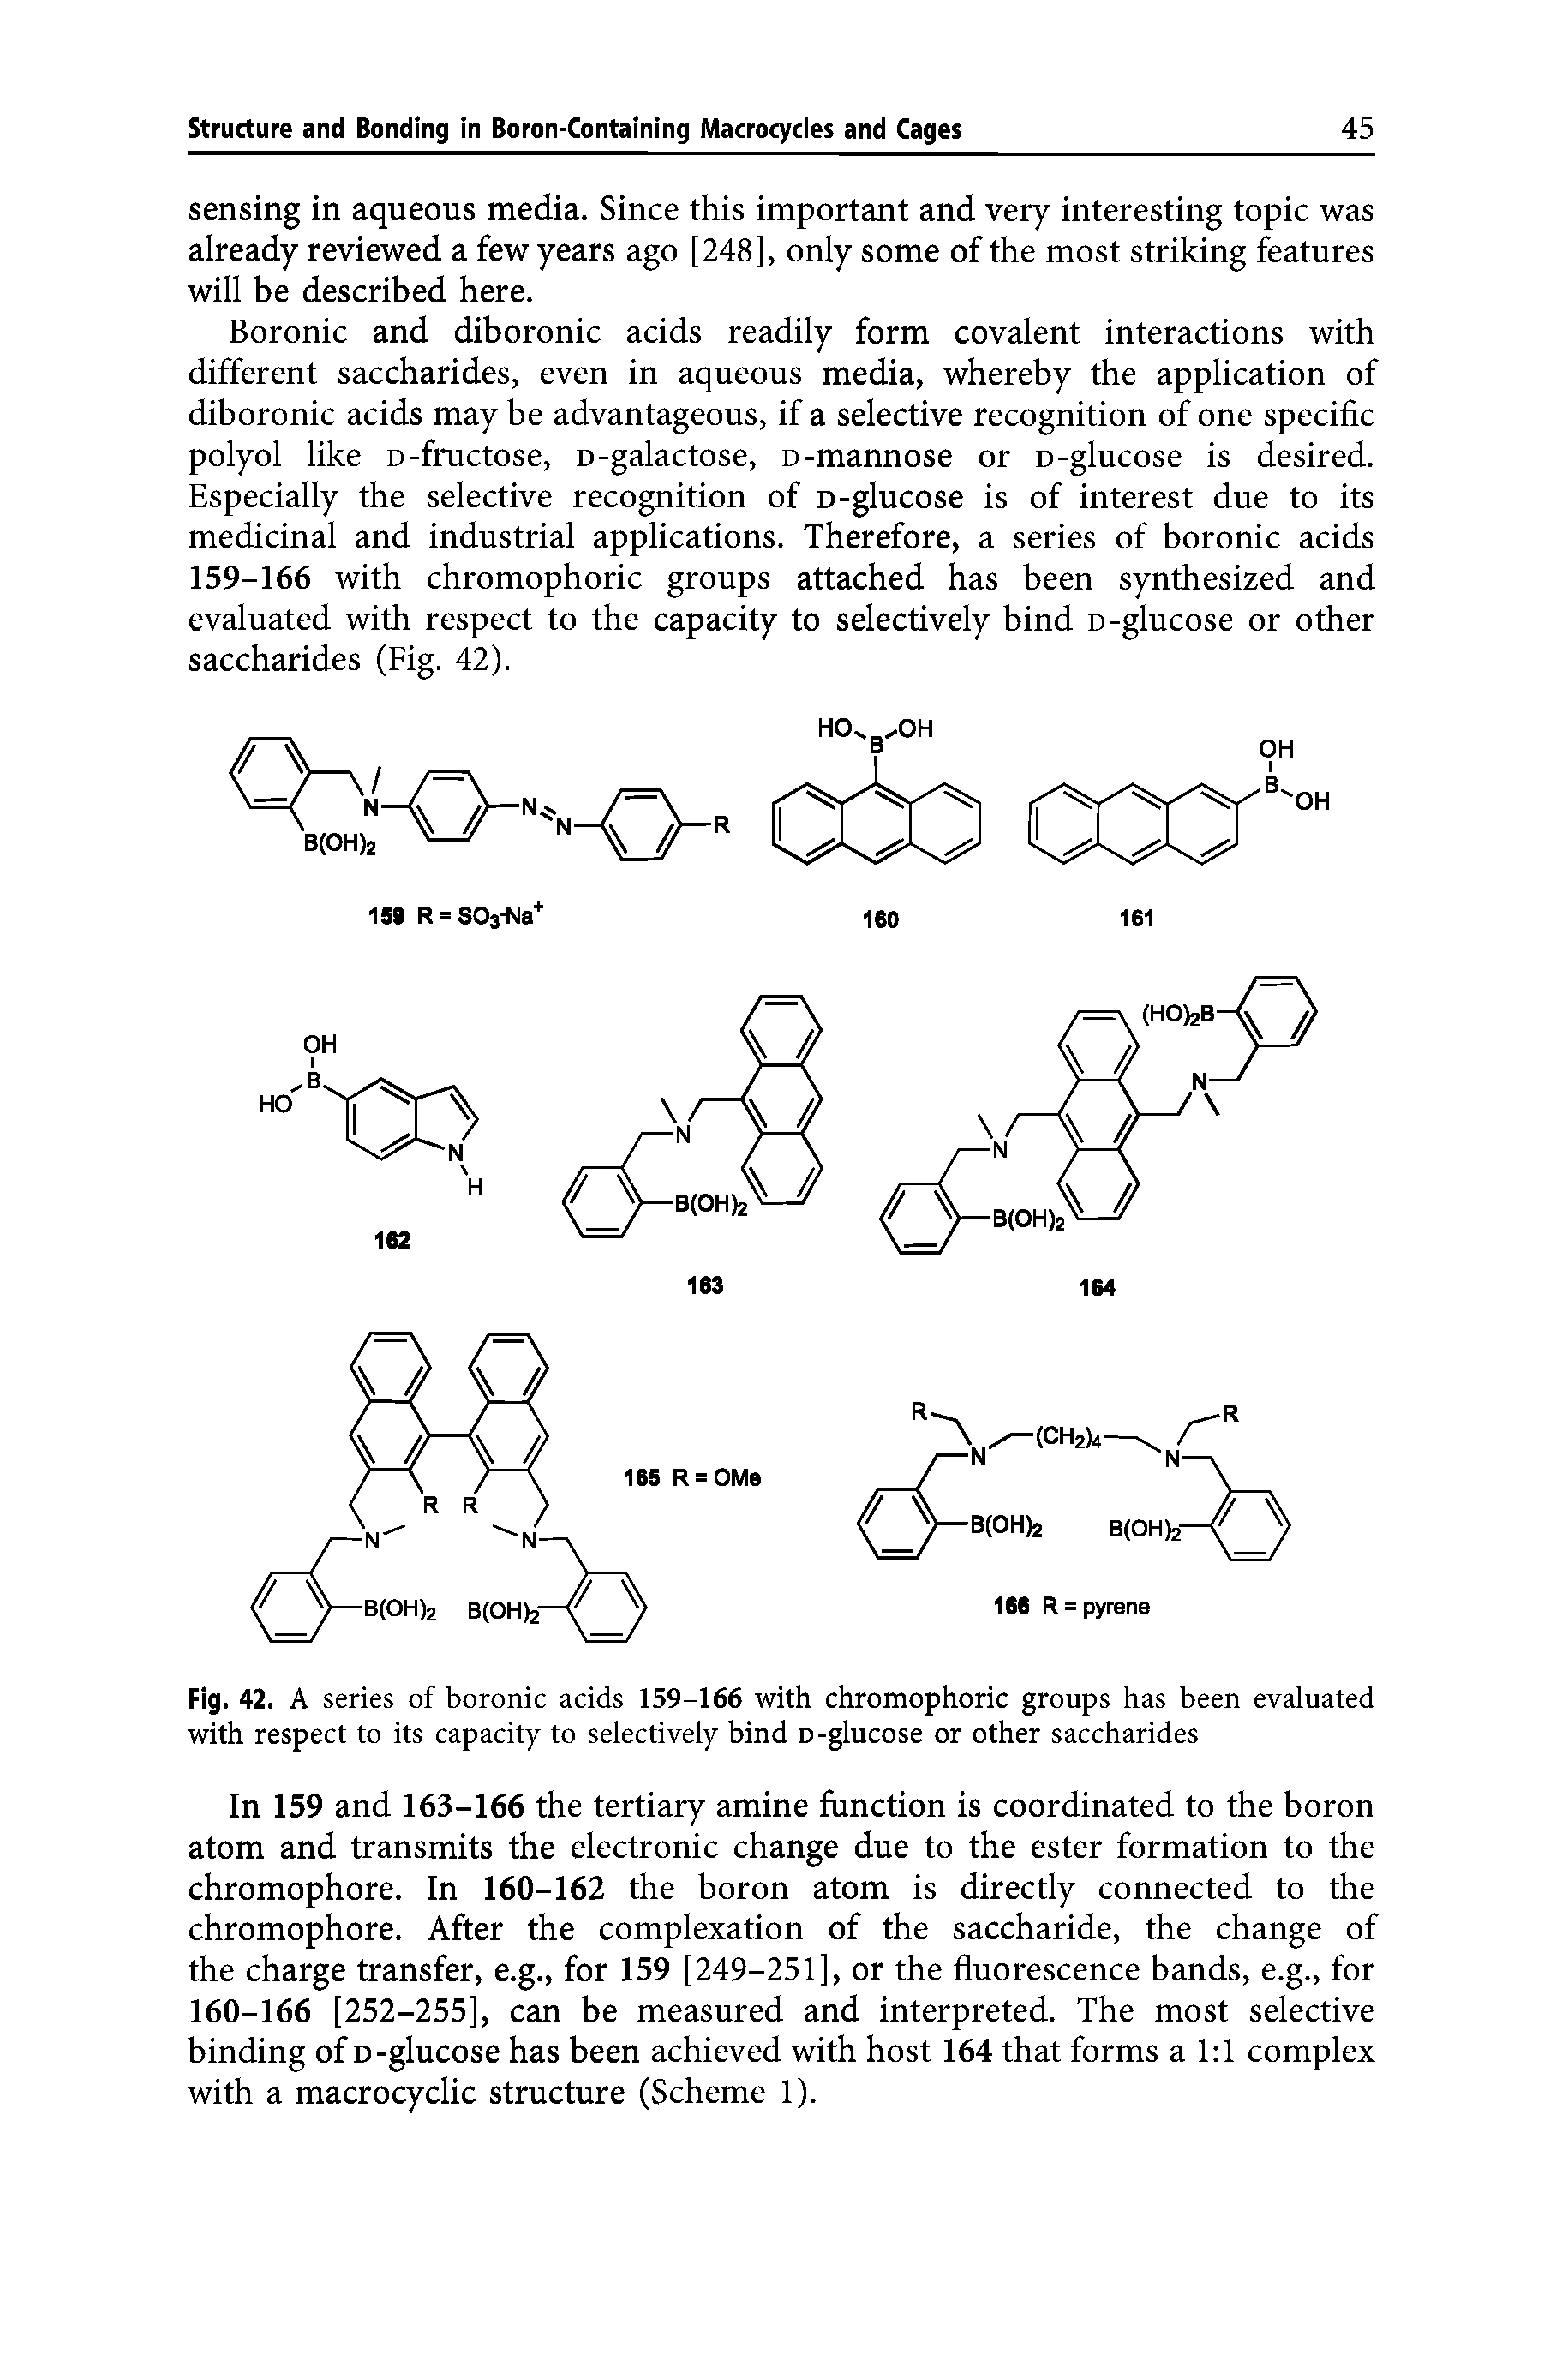 Fig. 42. A series of boronic acids 159-166 with chromophoric groups has been evaluated with respect to its capacity to selectively bind d-glucose or other saccharides...